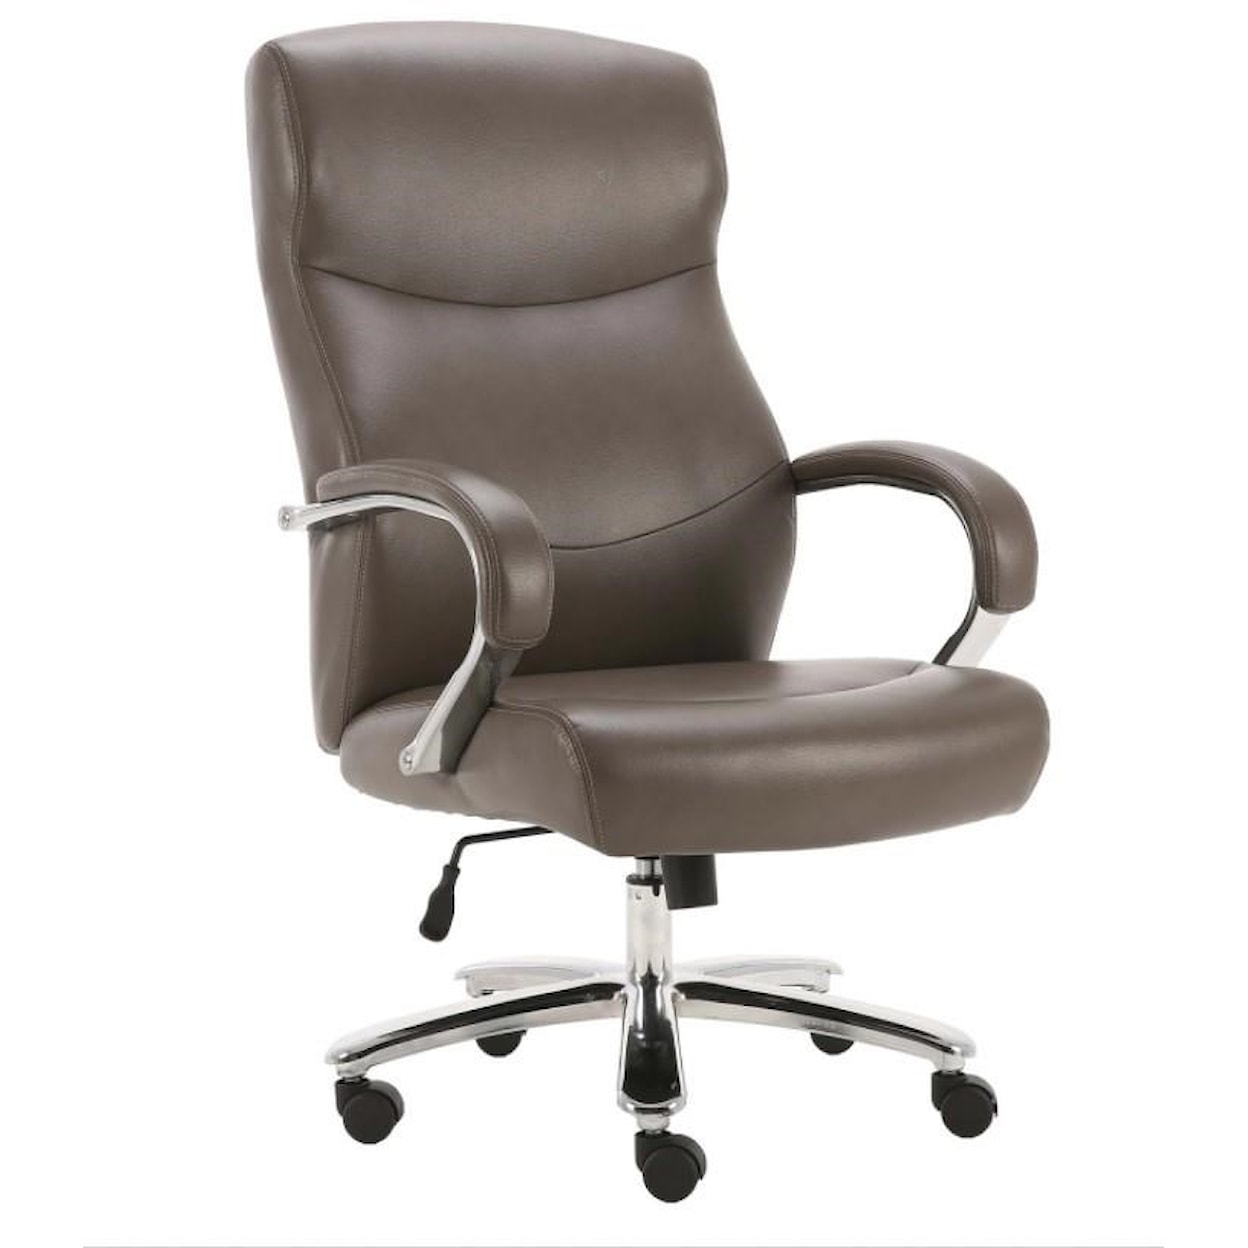 Parker Living Desk Chairs Office Task Chairs